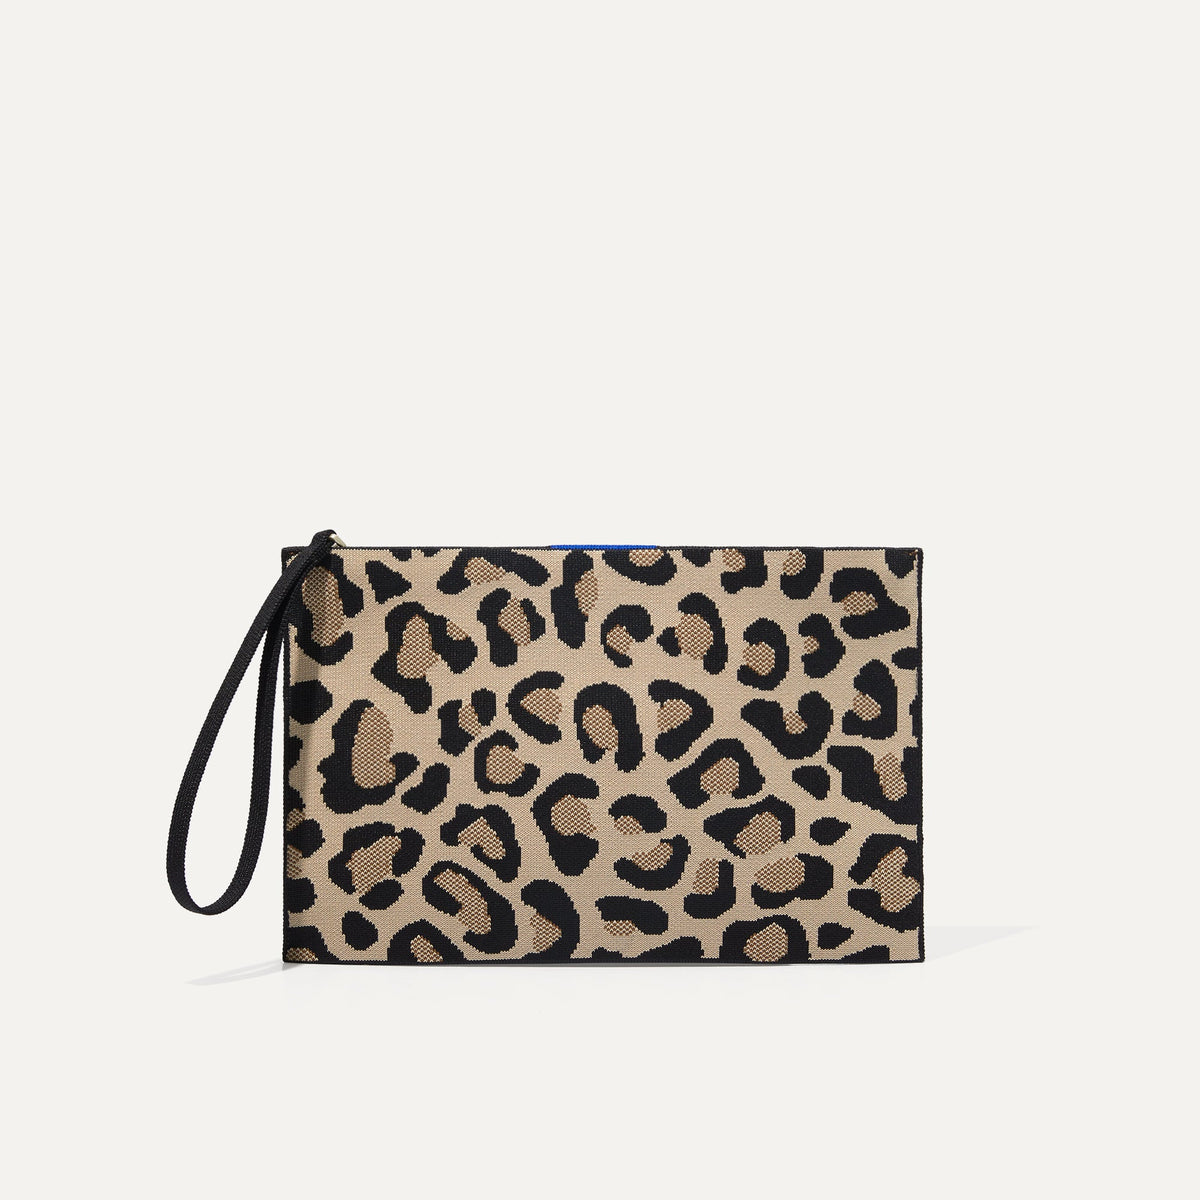 The Wristlet in Desert Cat | Women's Pouches | Rothy's